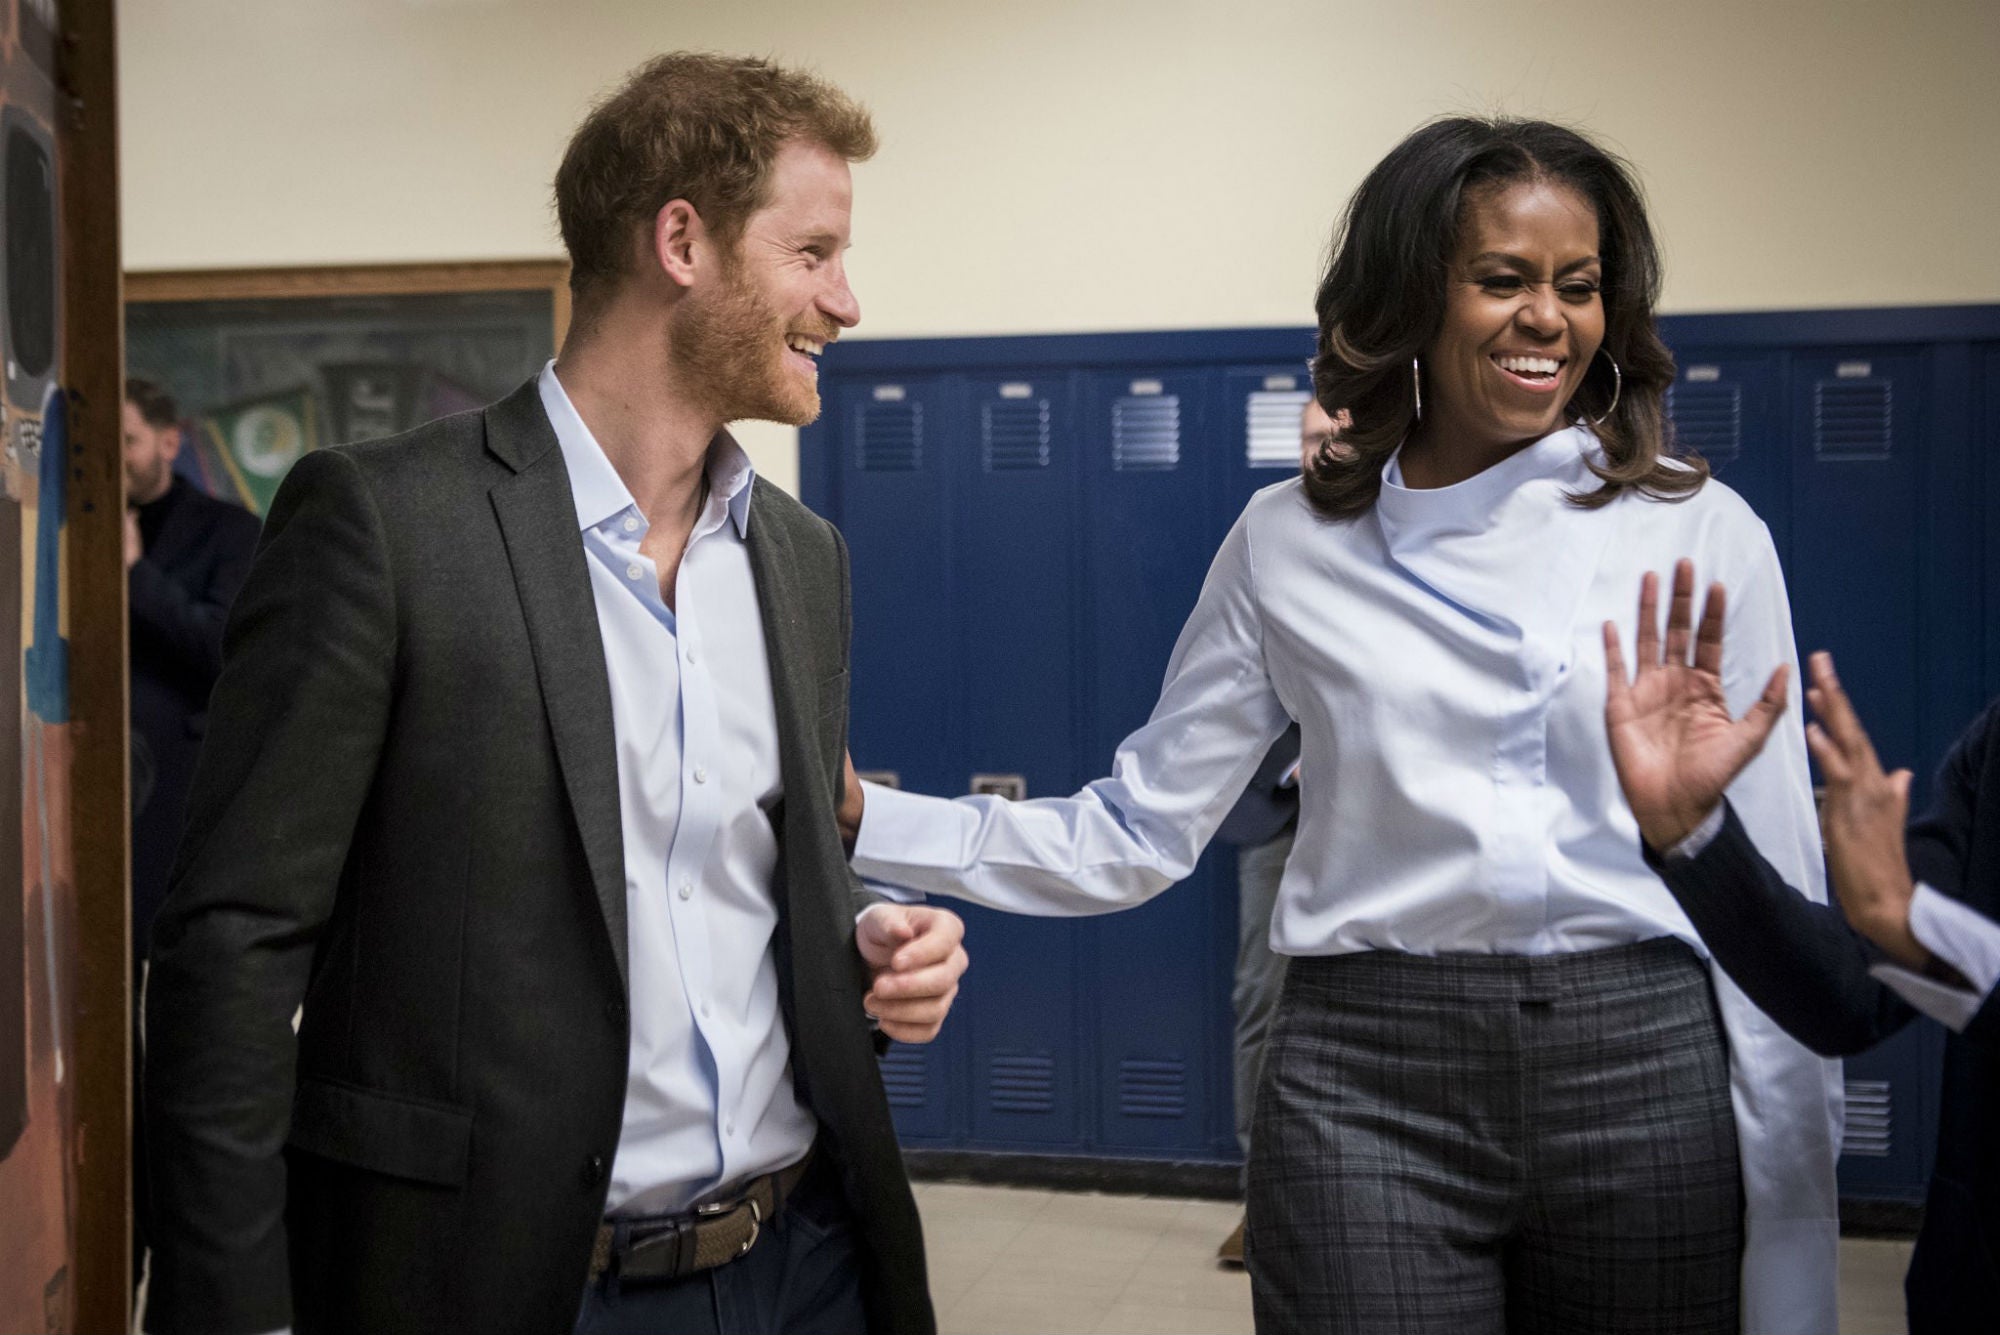 Prince Harry And Michelle Obama Made These Chicago High School Students' Day
